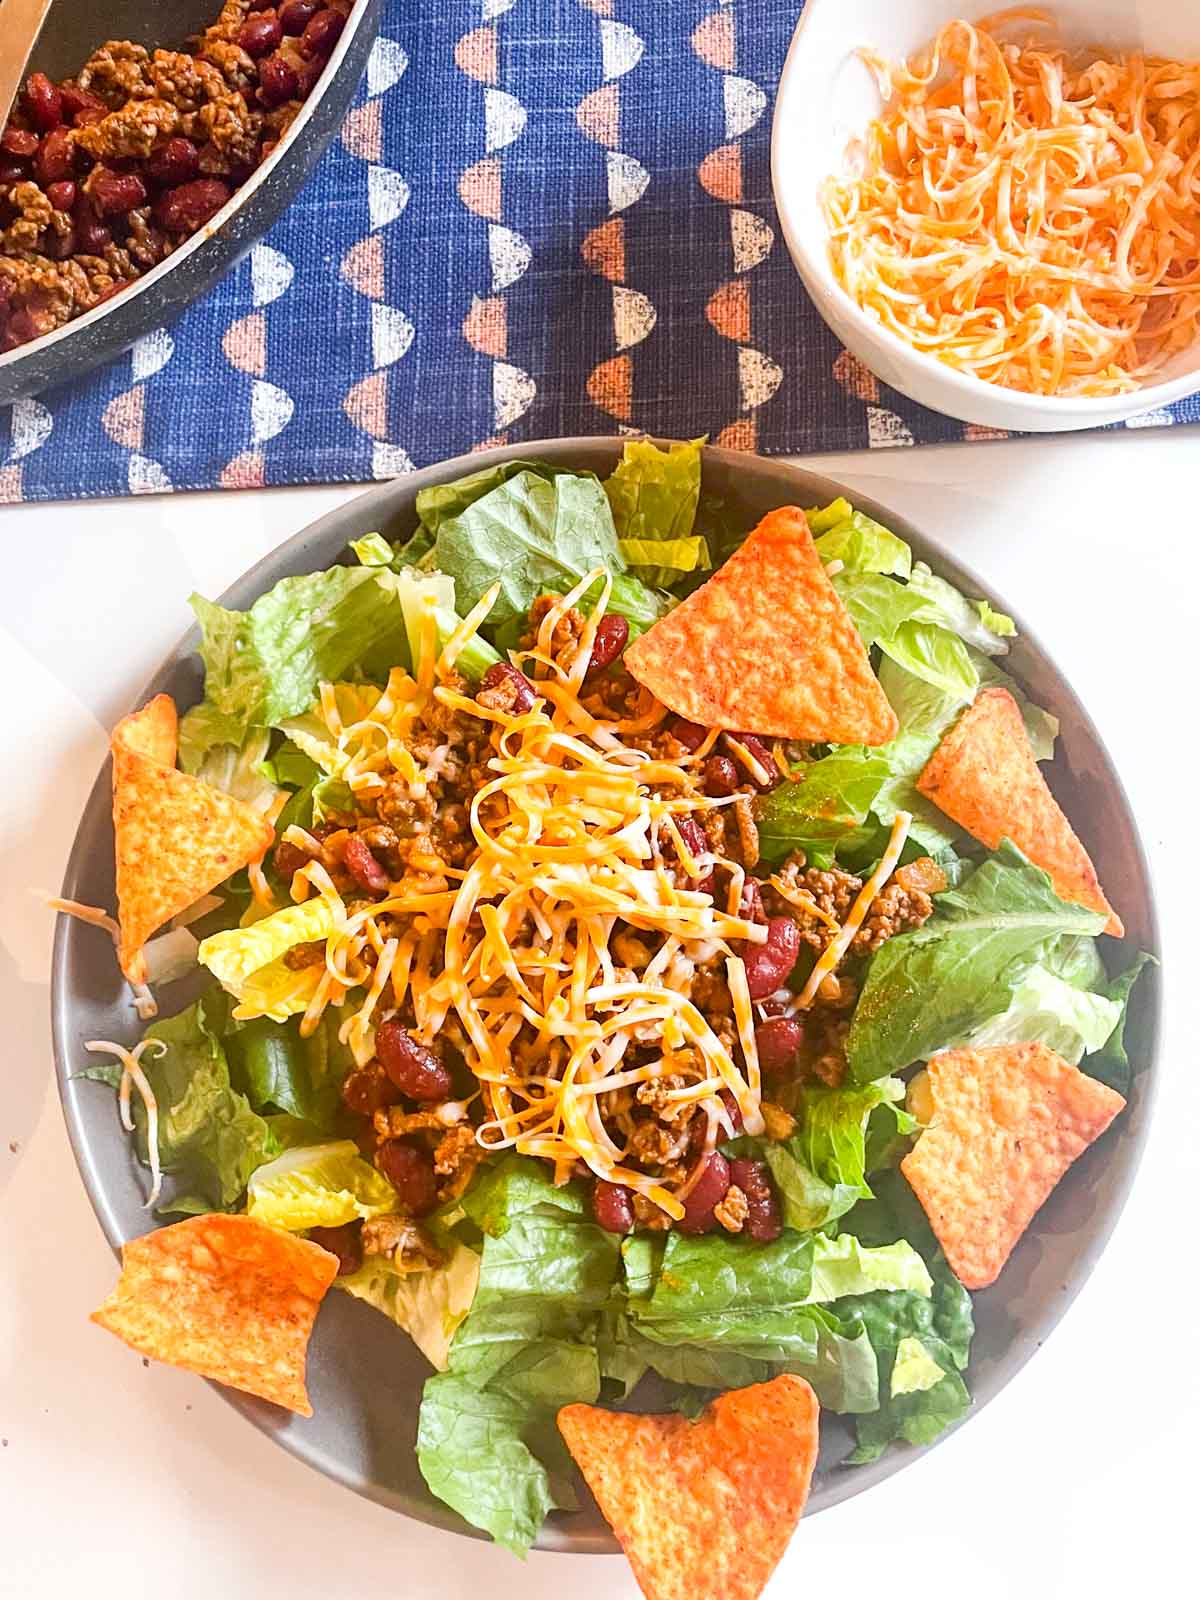 Taco salad on a plate with cheese and Doritos.